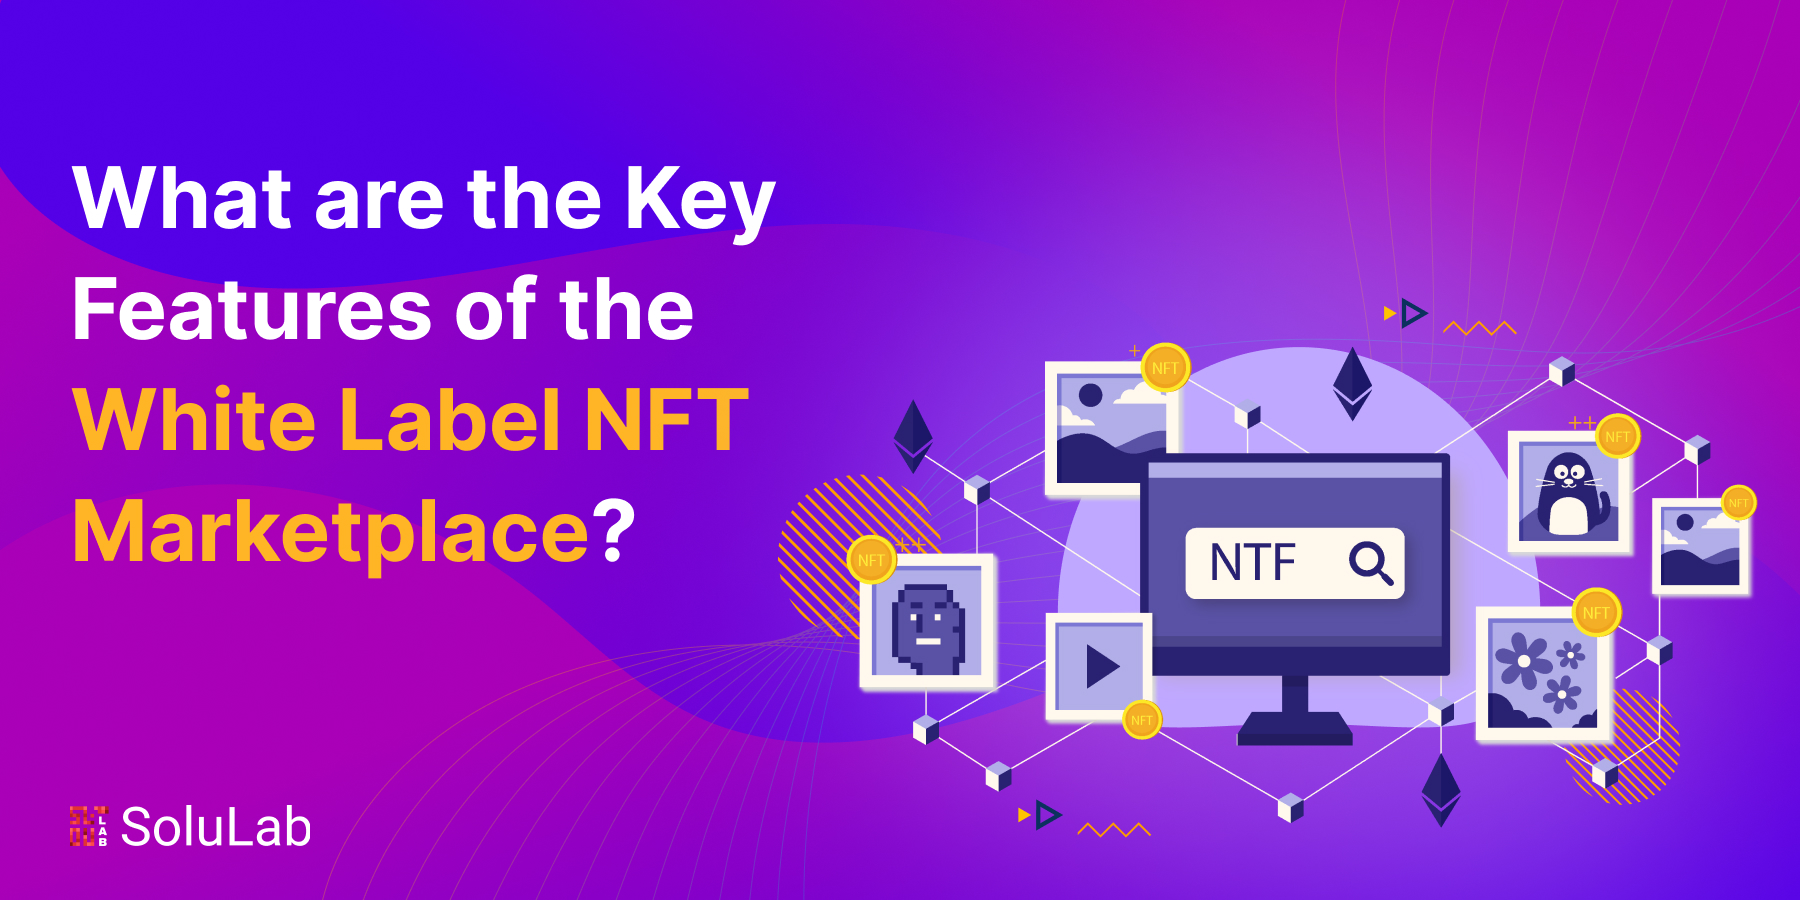 What are the Key Features of the White-Label NFT Marketplace?